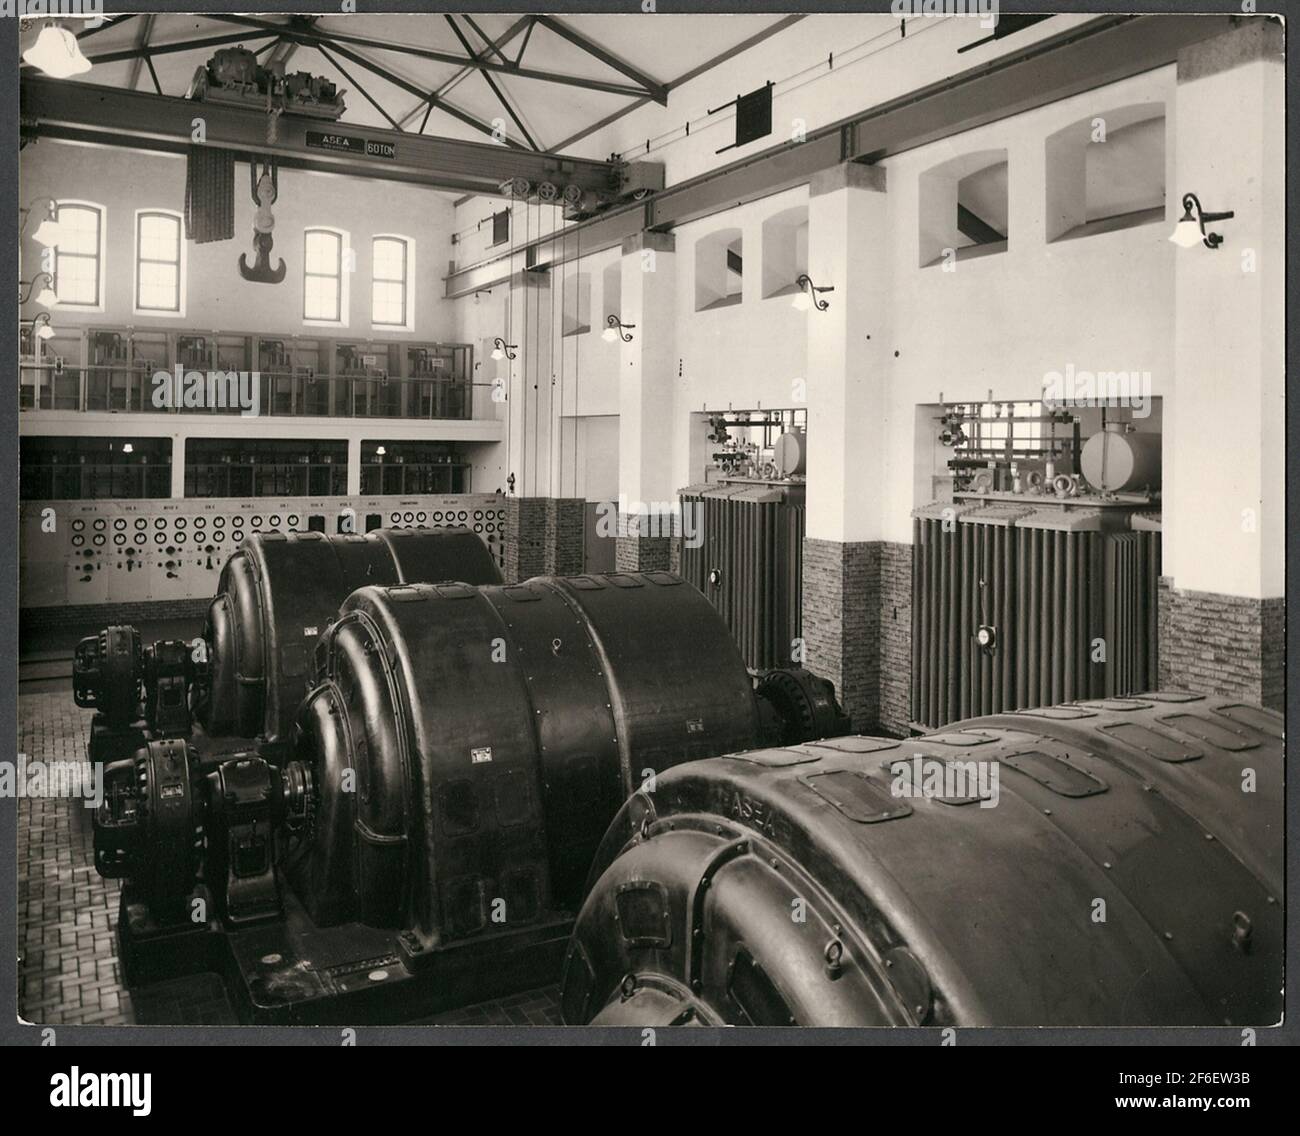 The reformer station electric motors Stock Photo - Alamy